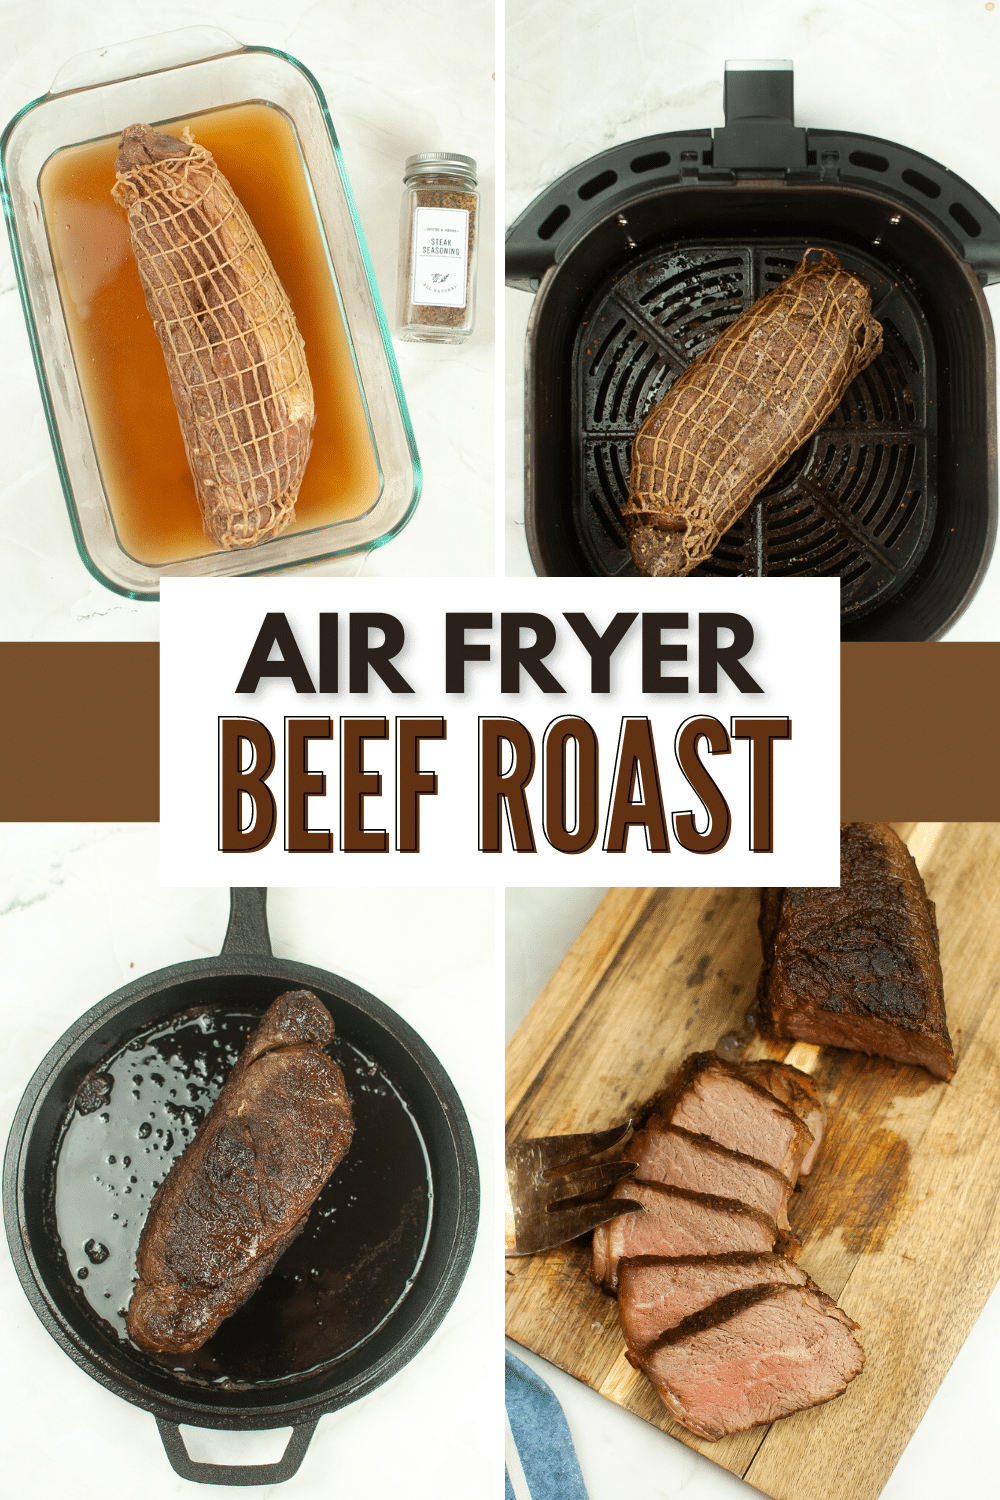 Air Fryer Beef Roast is a delicious and healthy way to enjoy a classic comfort food. This dish is perfect for busy weeknight meals! #airfryerbeefroast #airfryer #airfryerroastbeef #roast #airfryerrecipe via @wondermomwannab